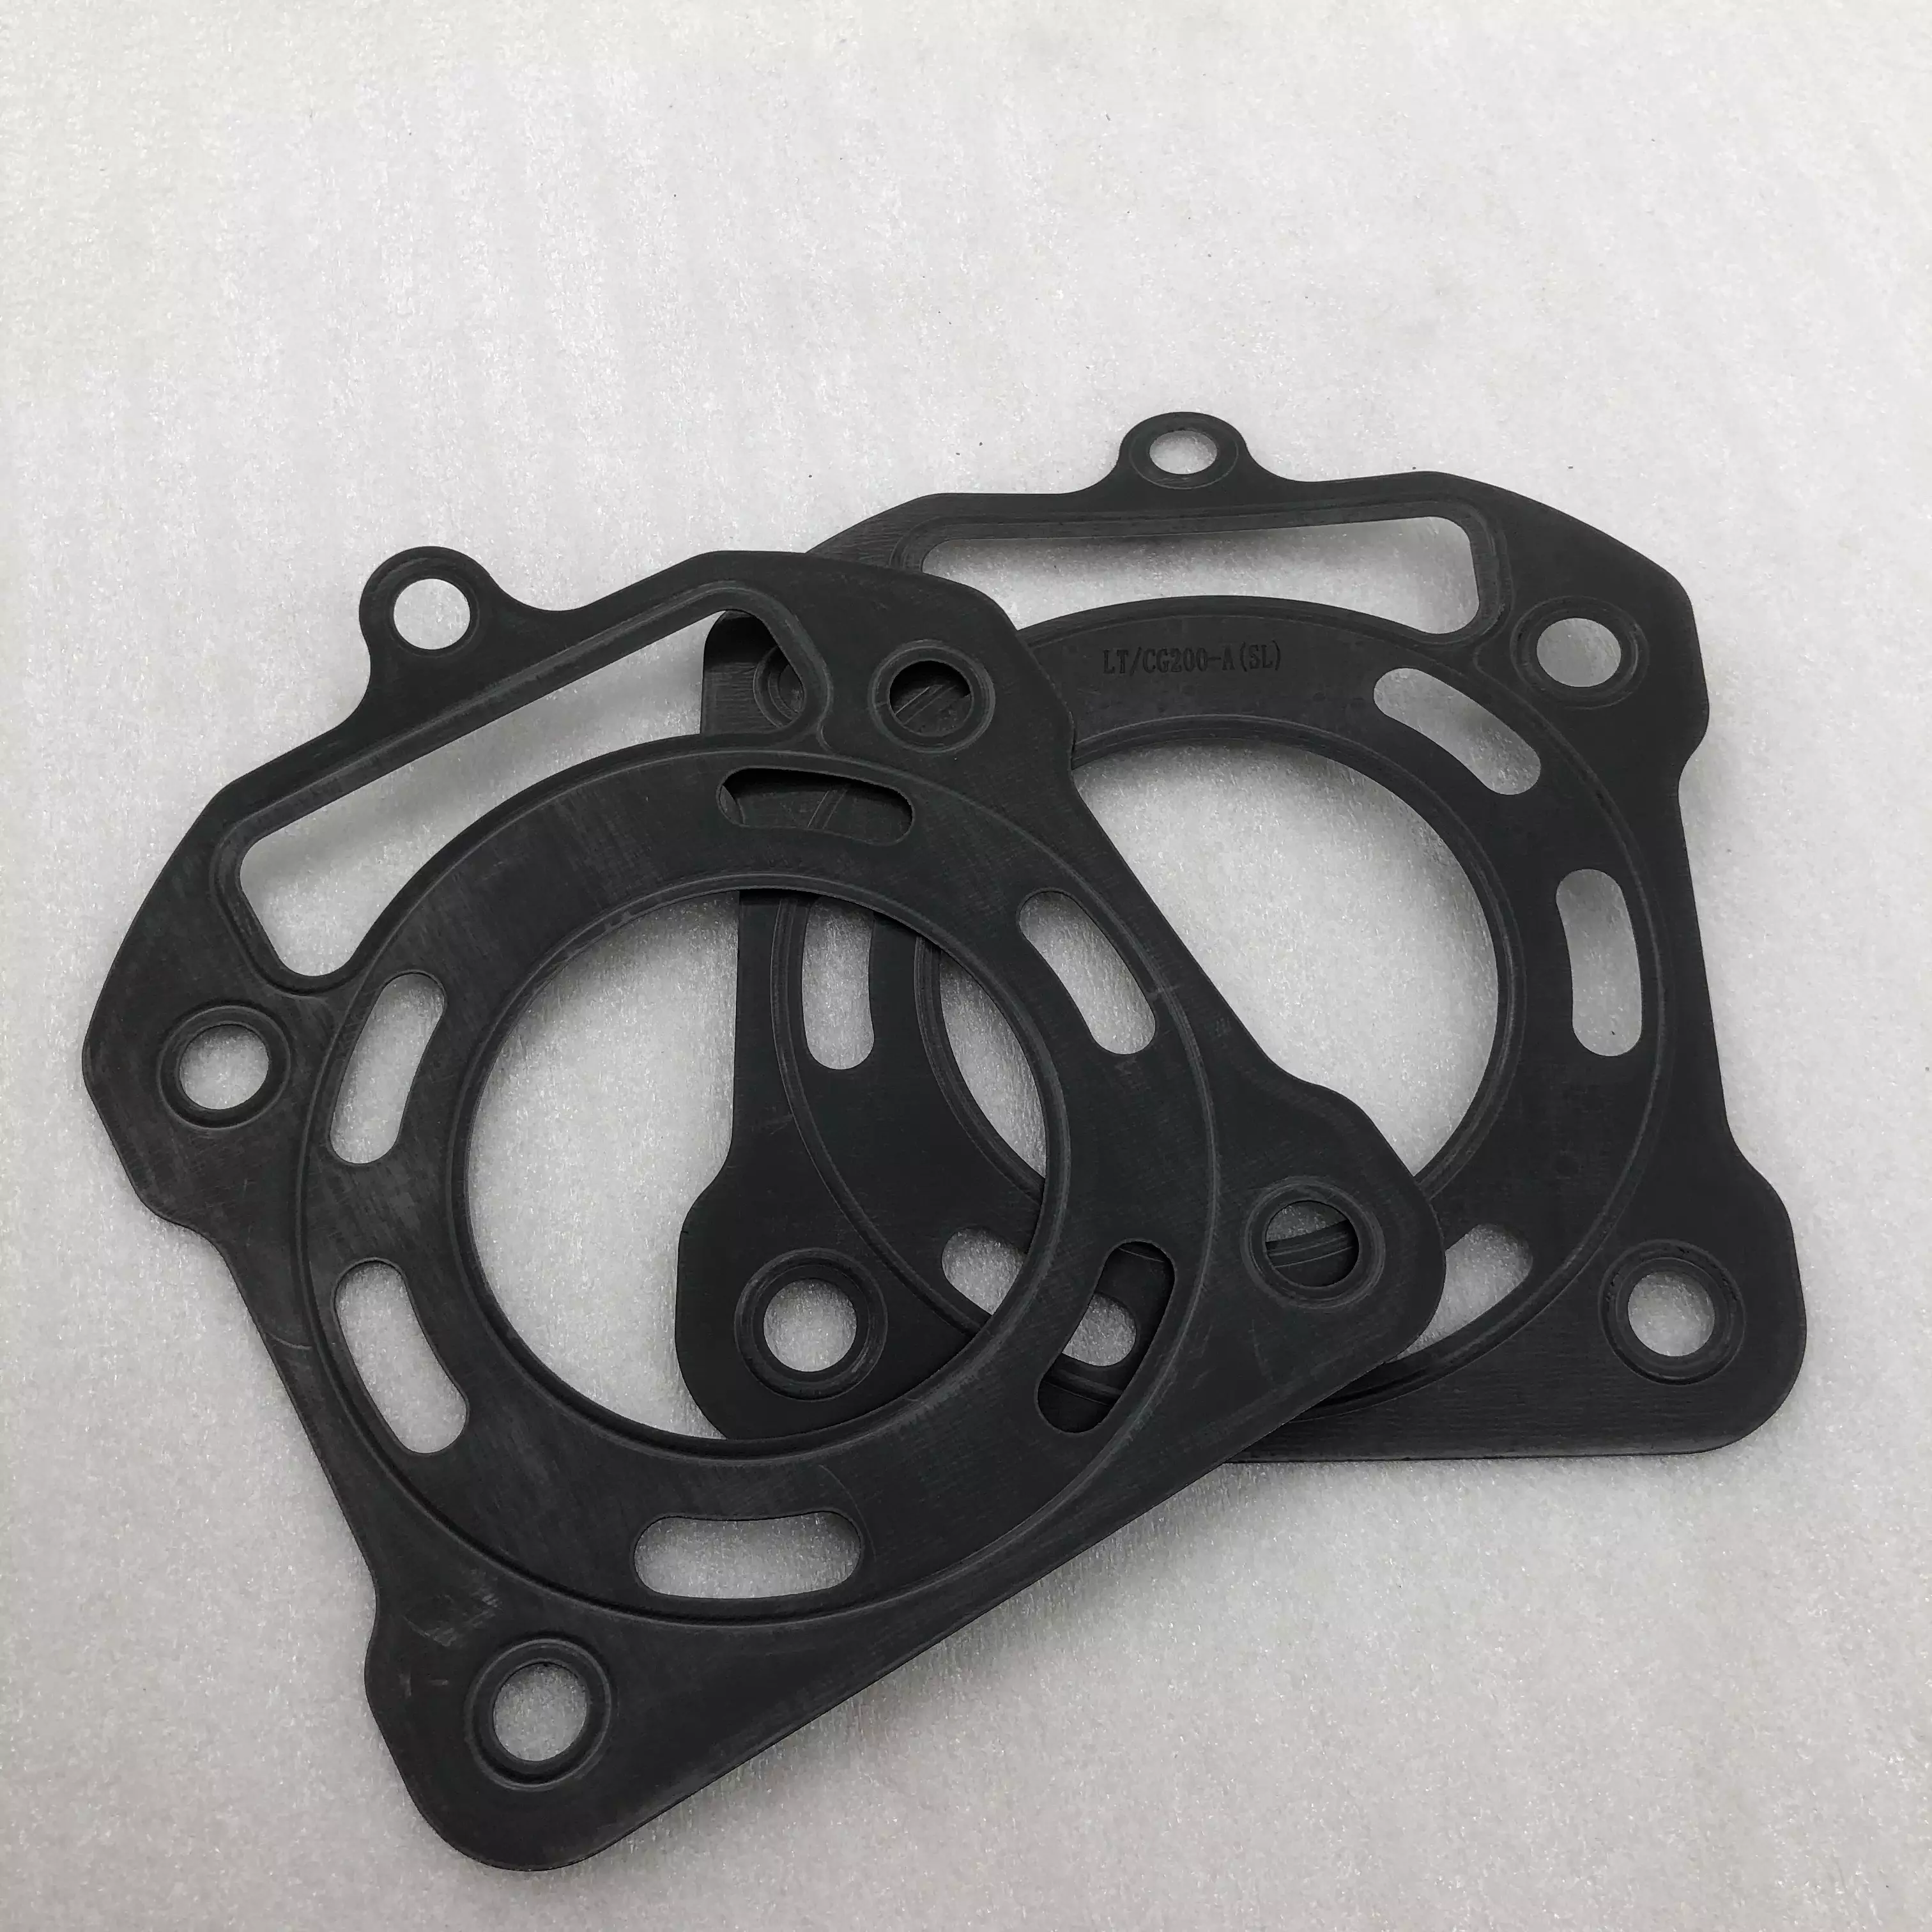 DAYANG tricycle spare parts replacement kit Cylinder Head Gasket For gasoline Engine Parts  CG200-A